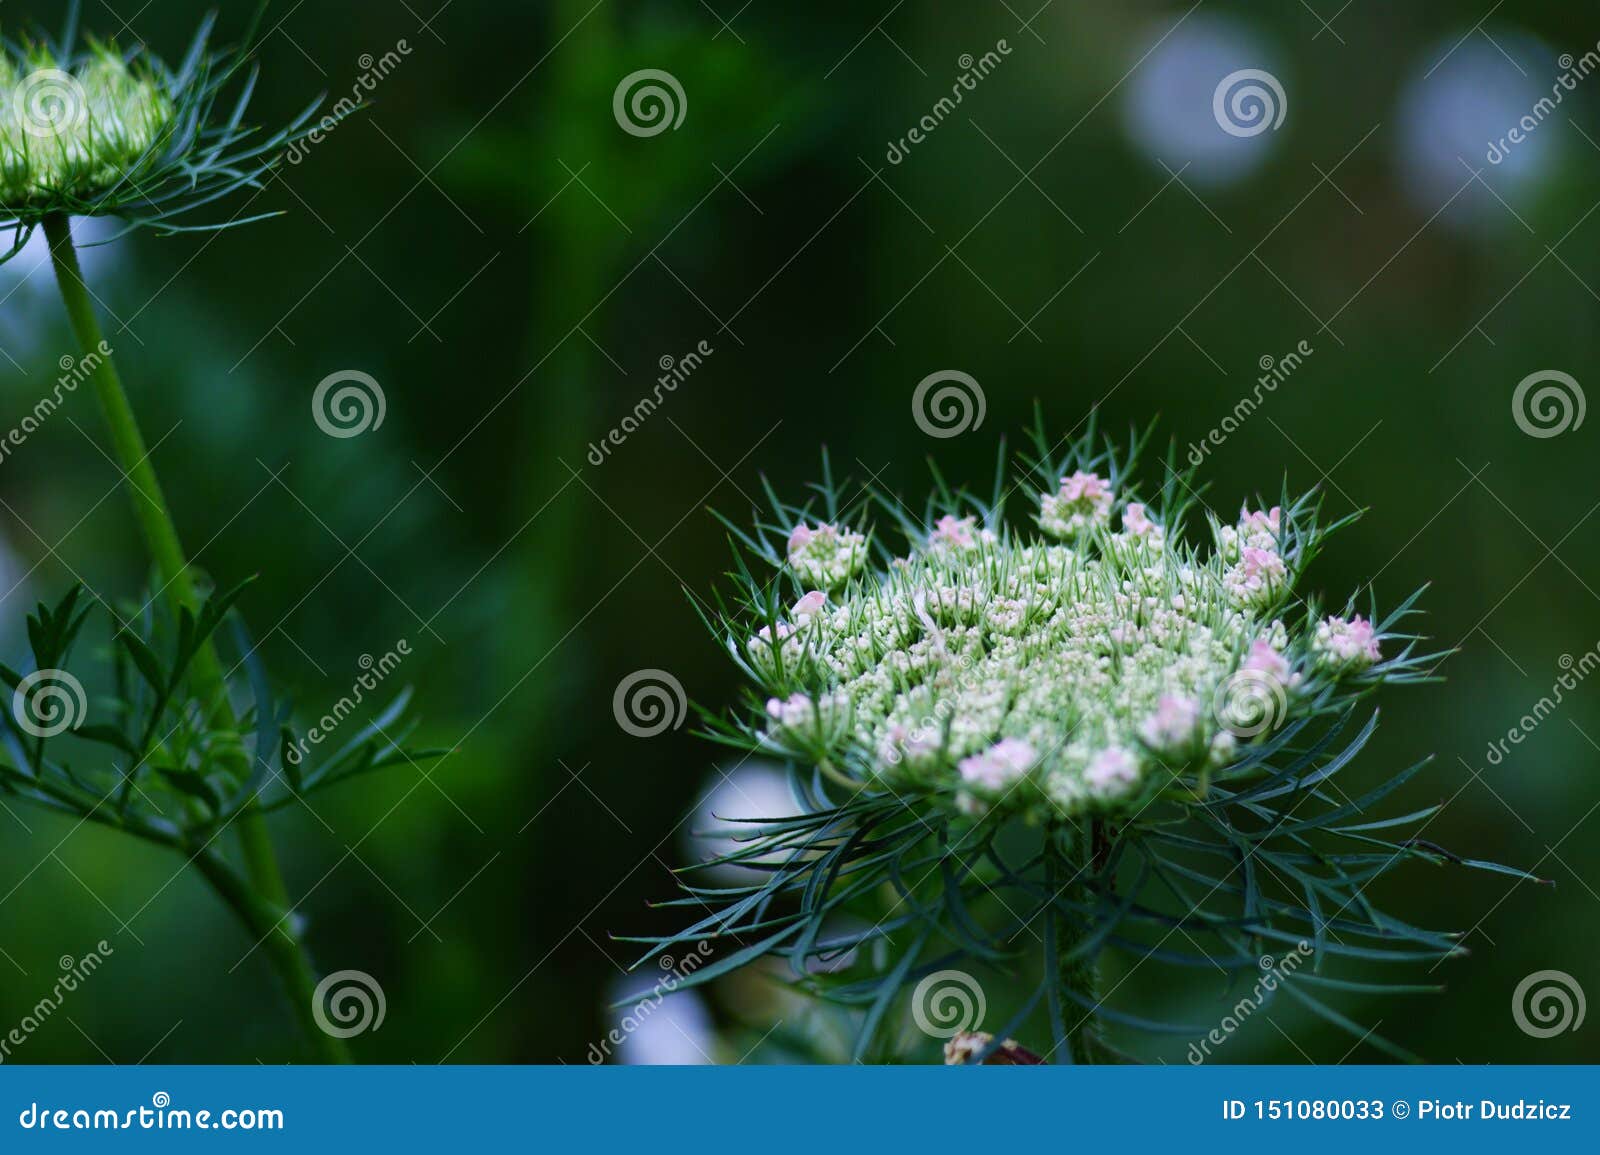 flowers and plants of the summer, nature of meadows, fields and forests, beauty and diversity